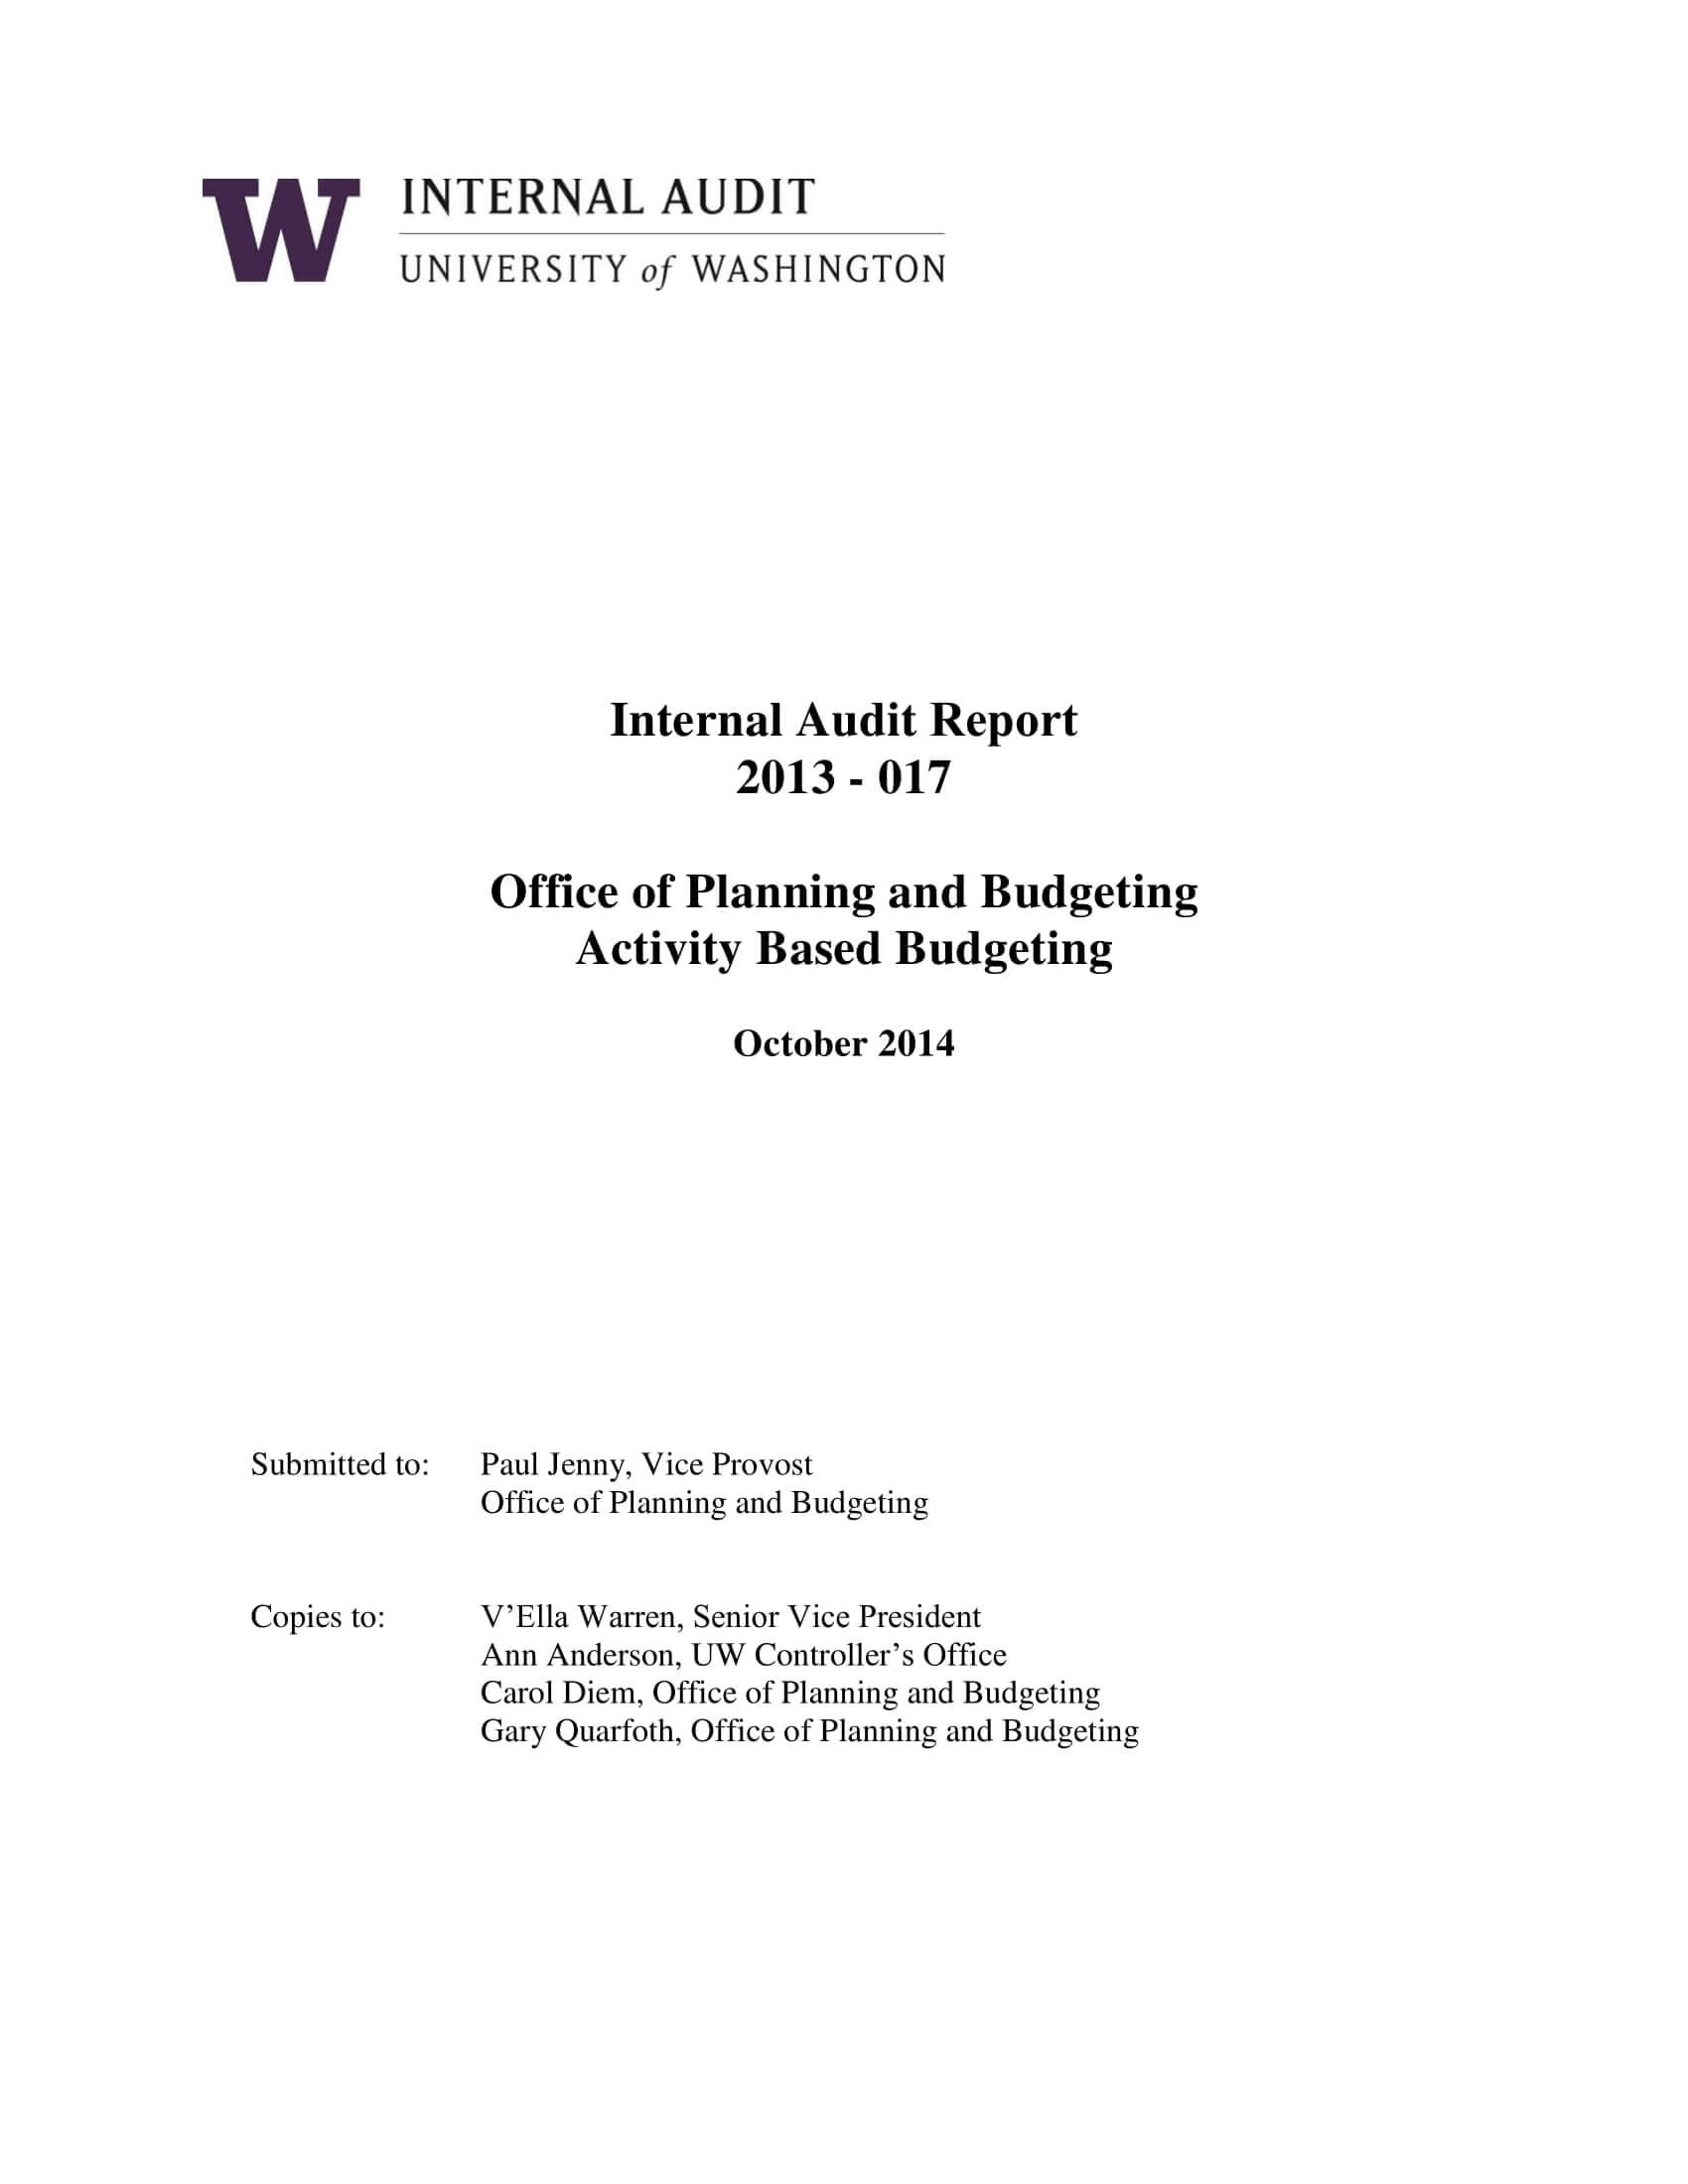 Sample Internal Audit Report In Forensic Accounting Report Template